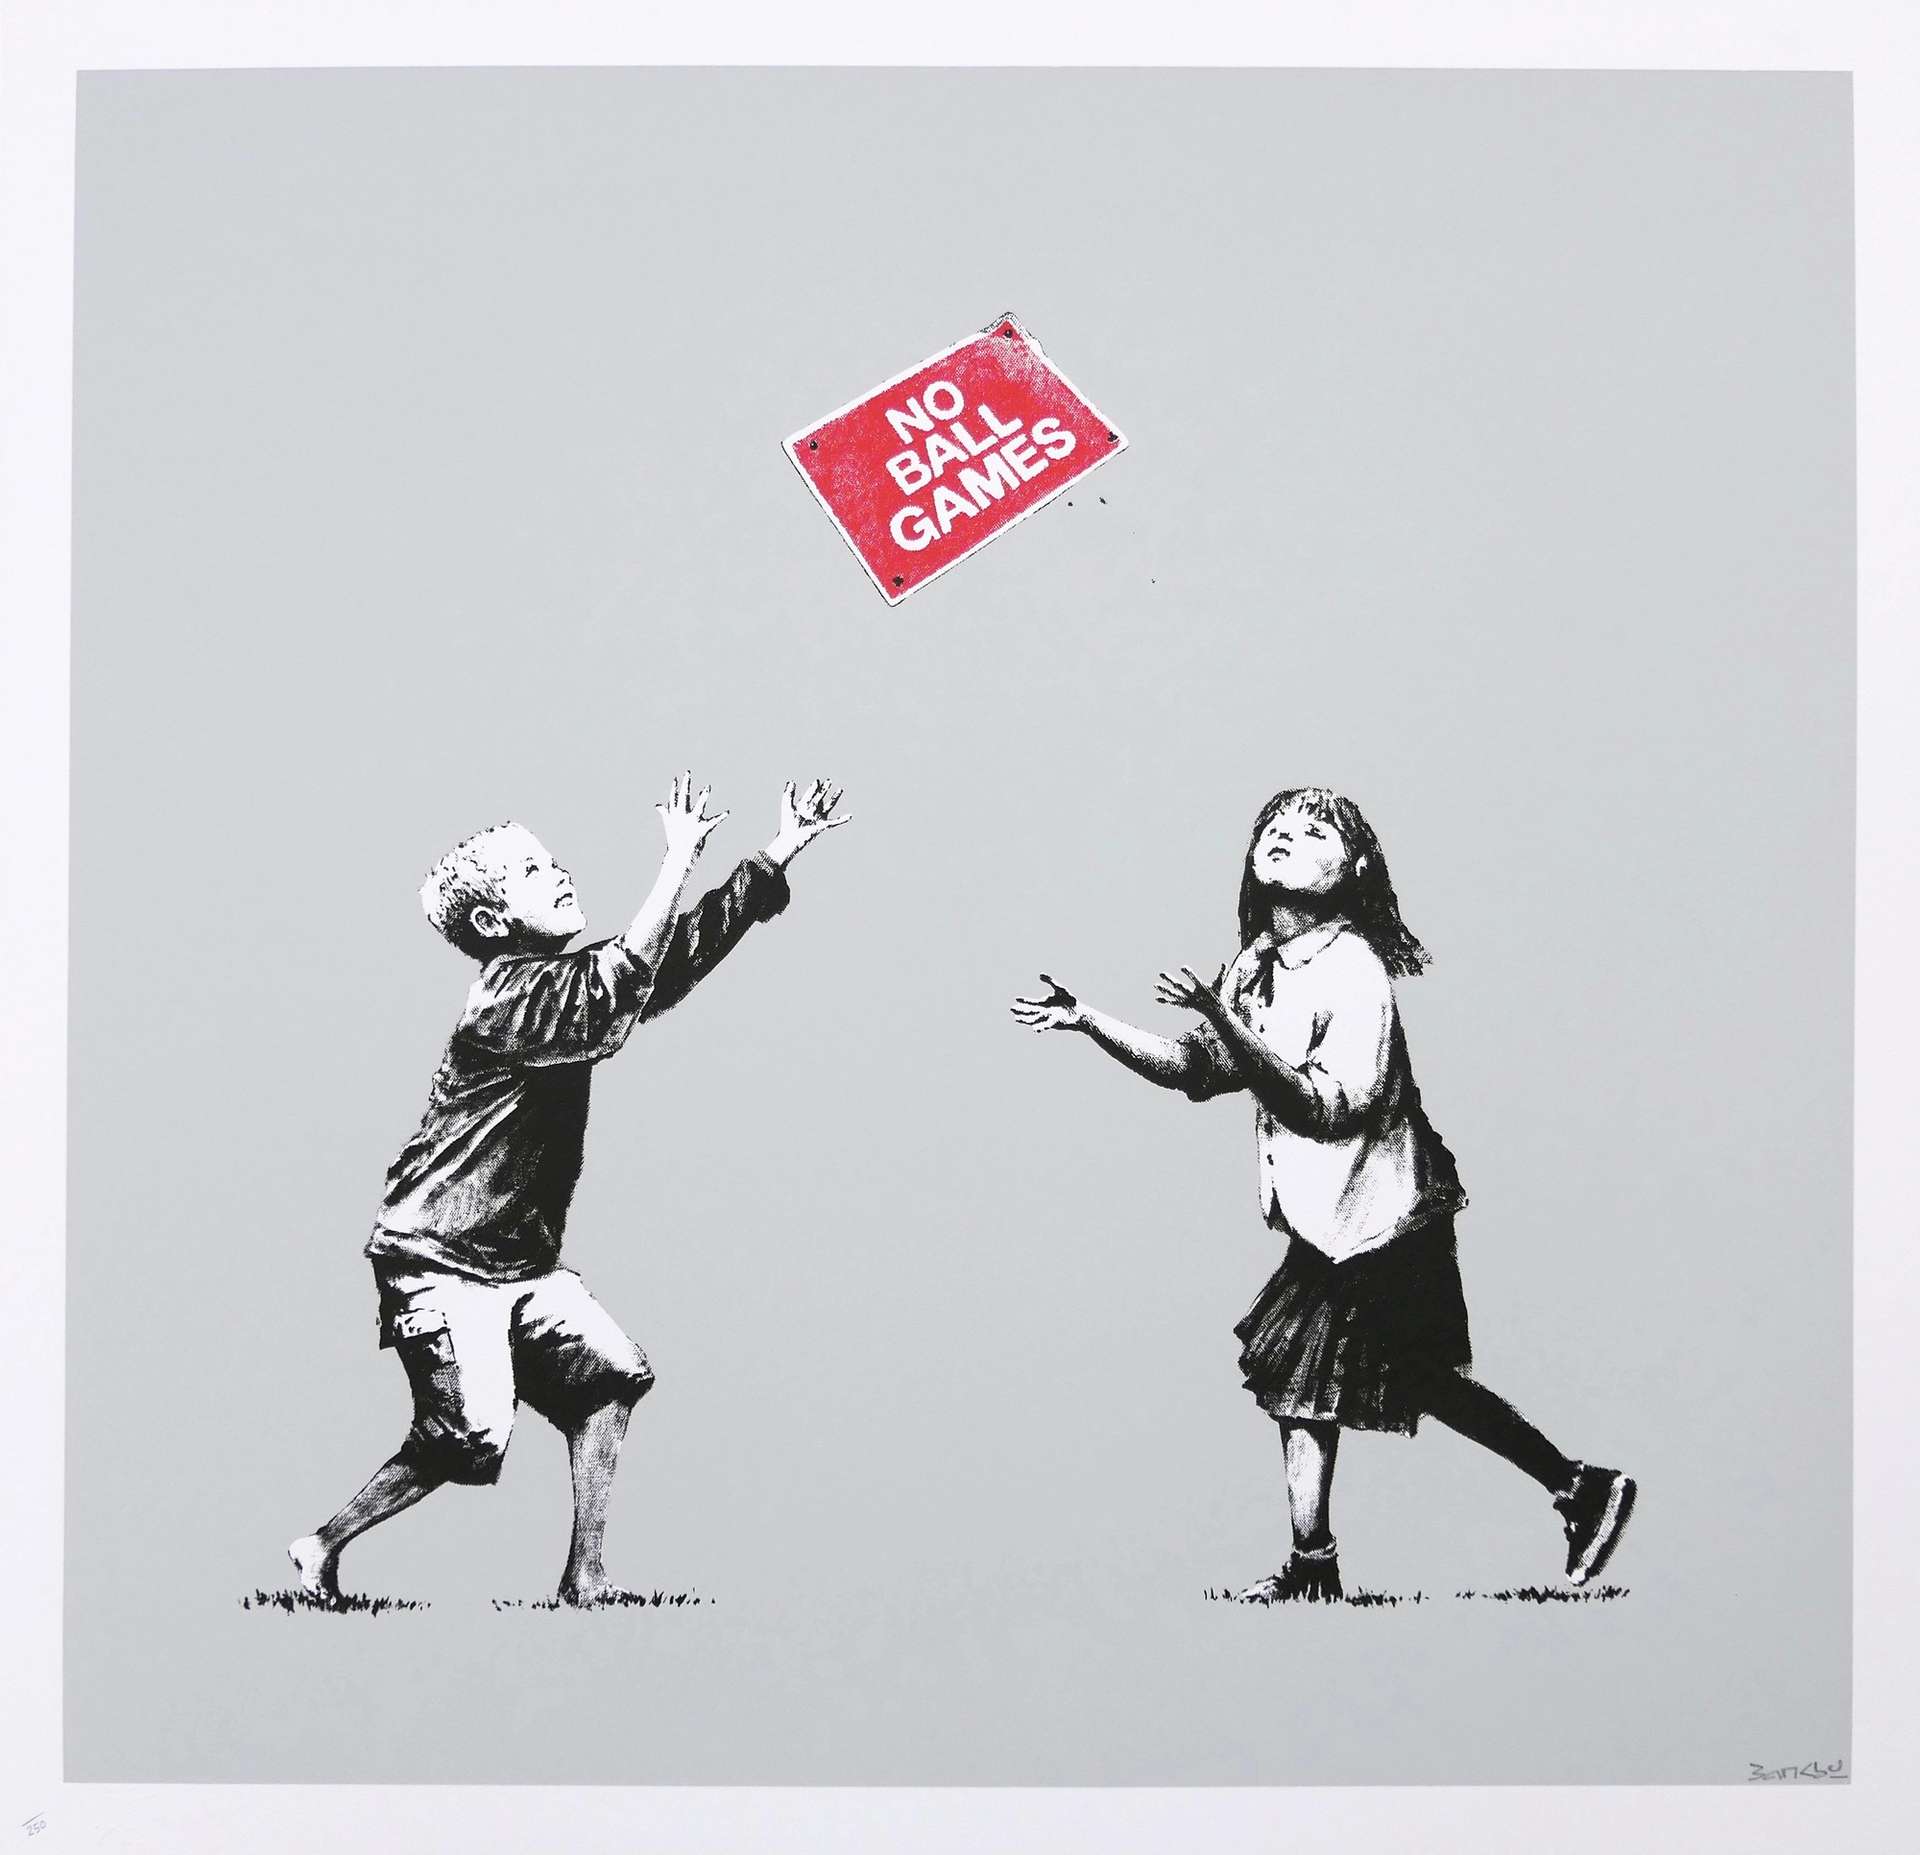 Screenprint by Banksy depicting two children against a grey background reaching for a red sign reading: “NO BALL GAMES”.